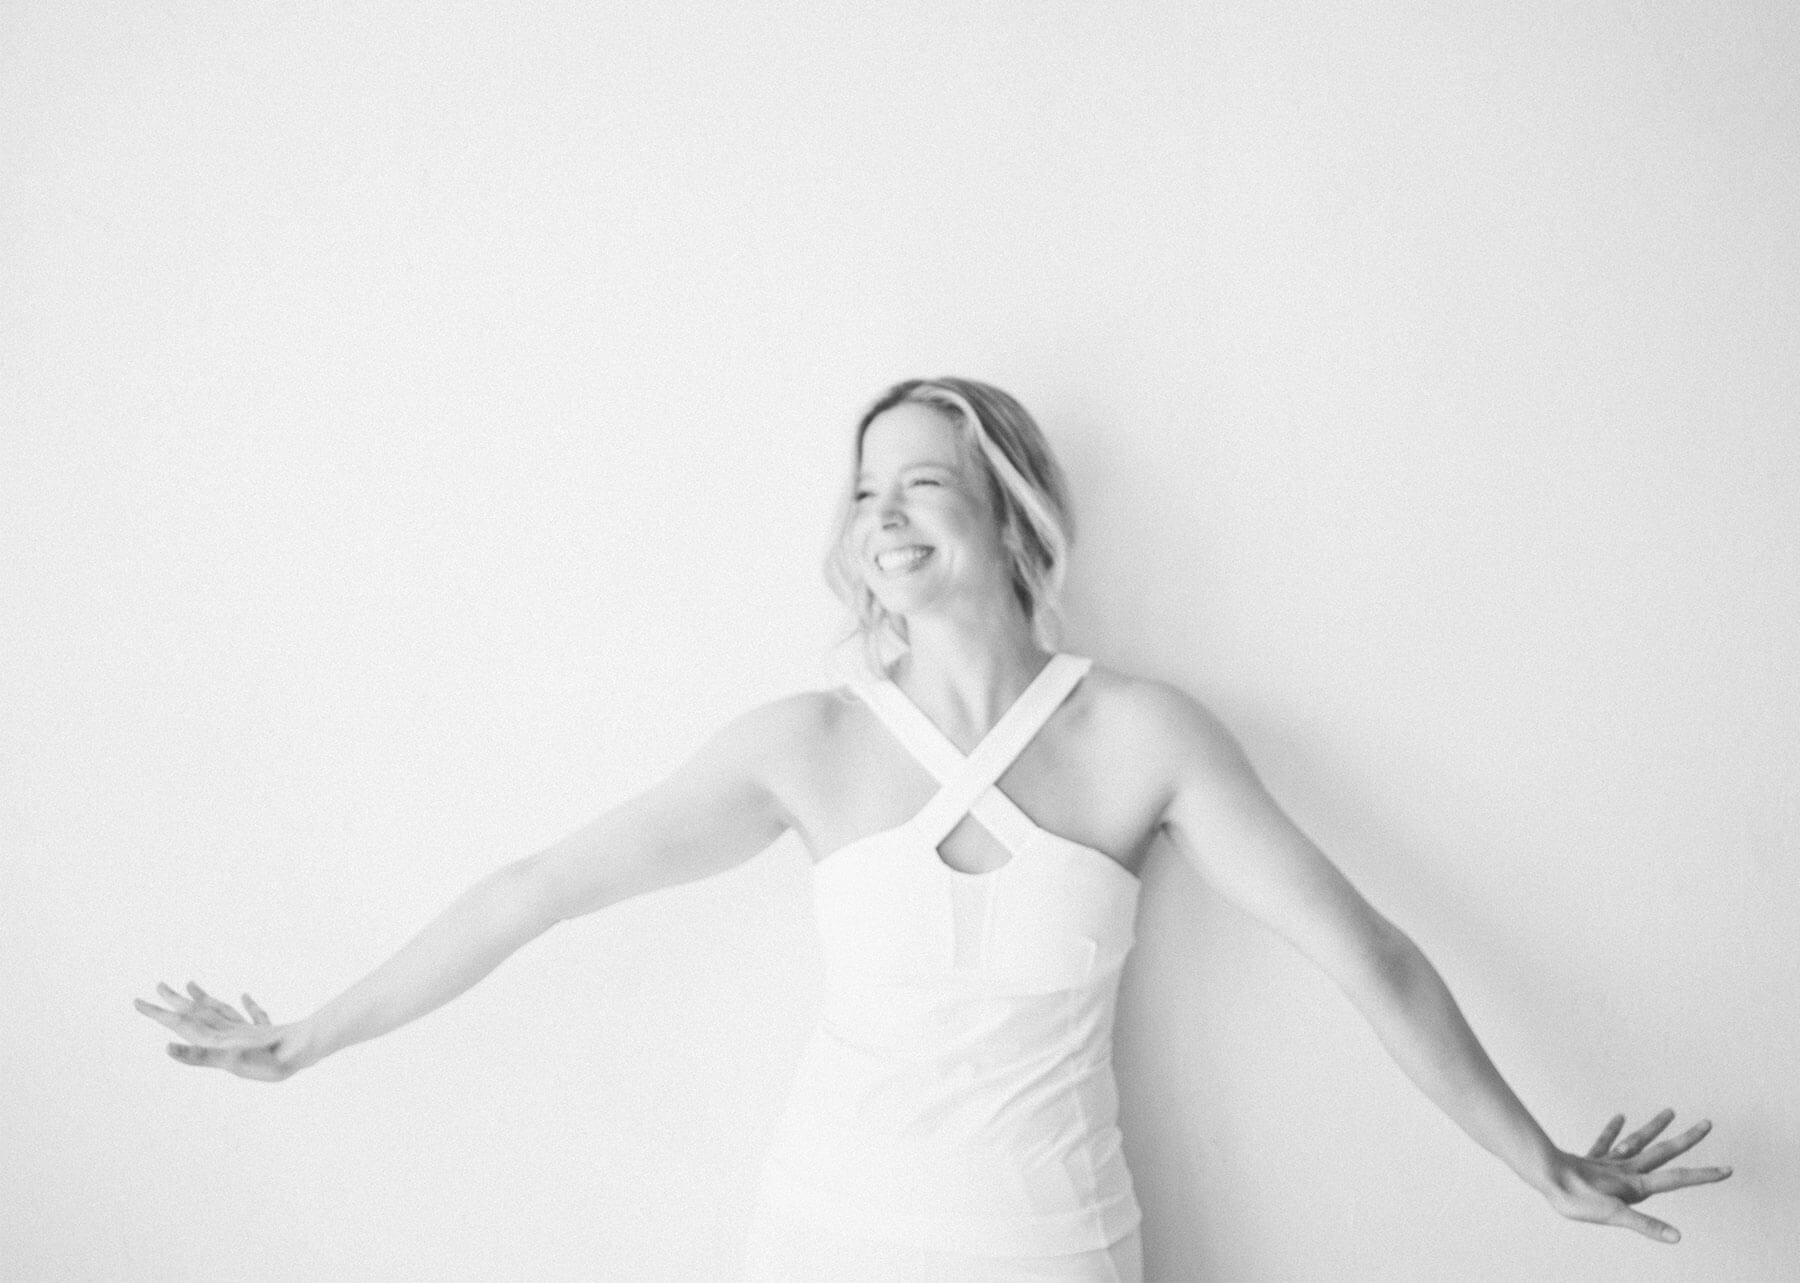 black and white photo of woman with arms stretched out smiling, wearing white top